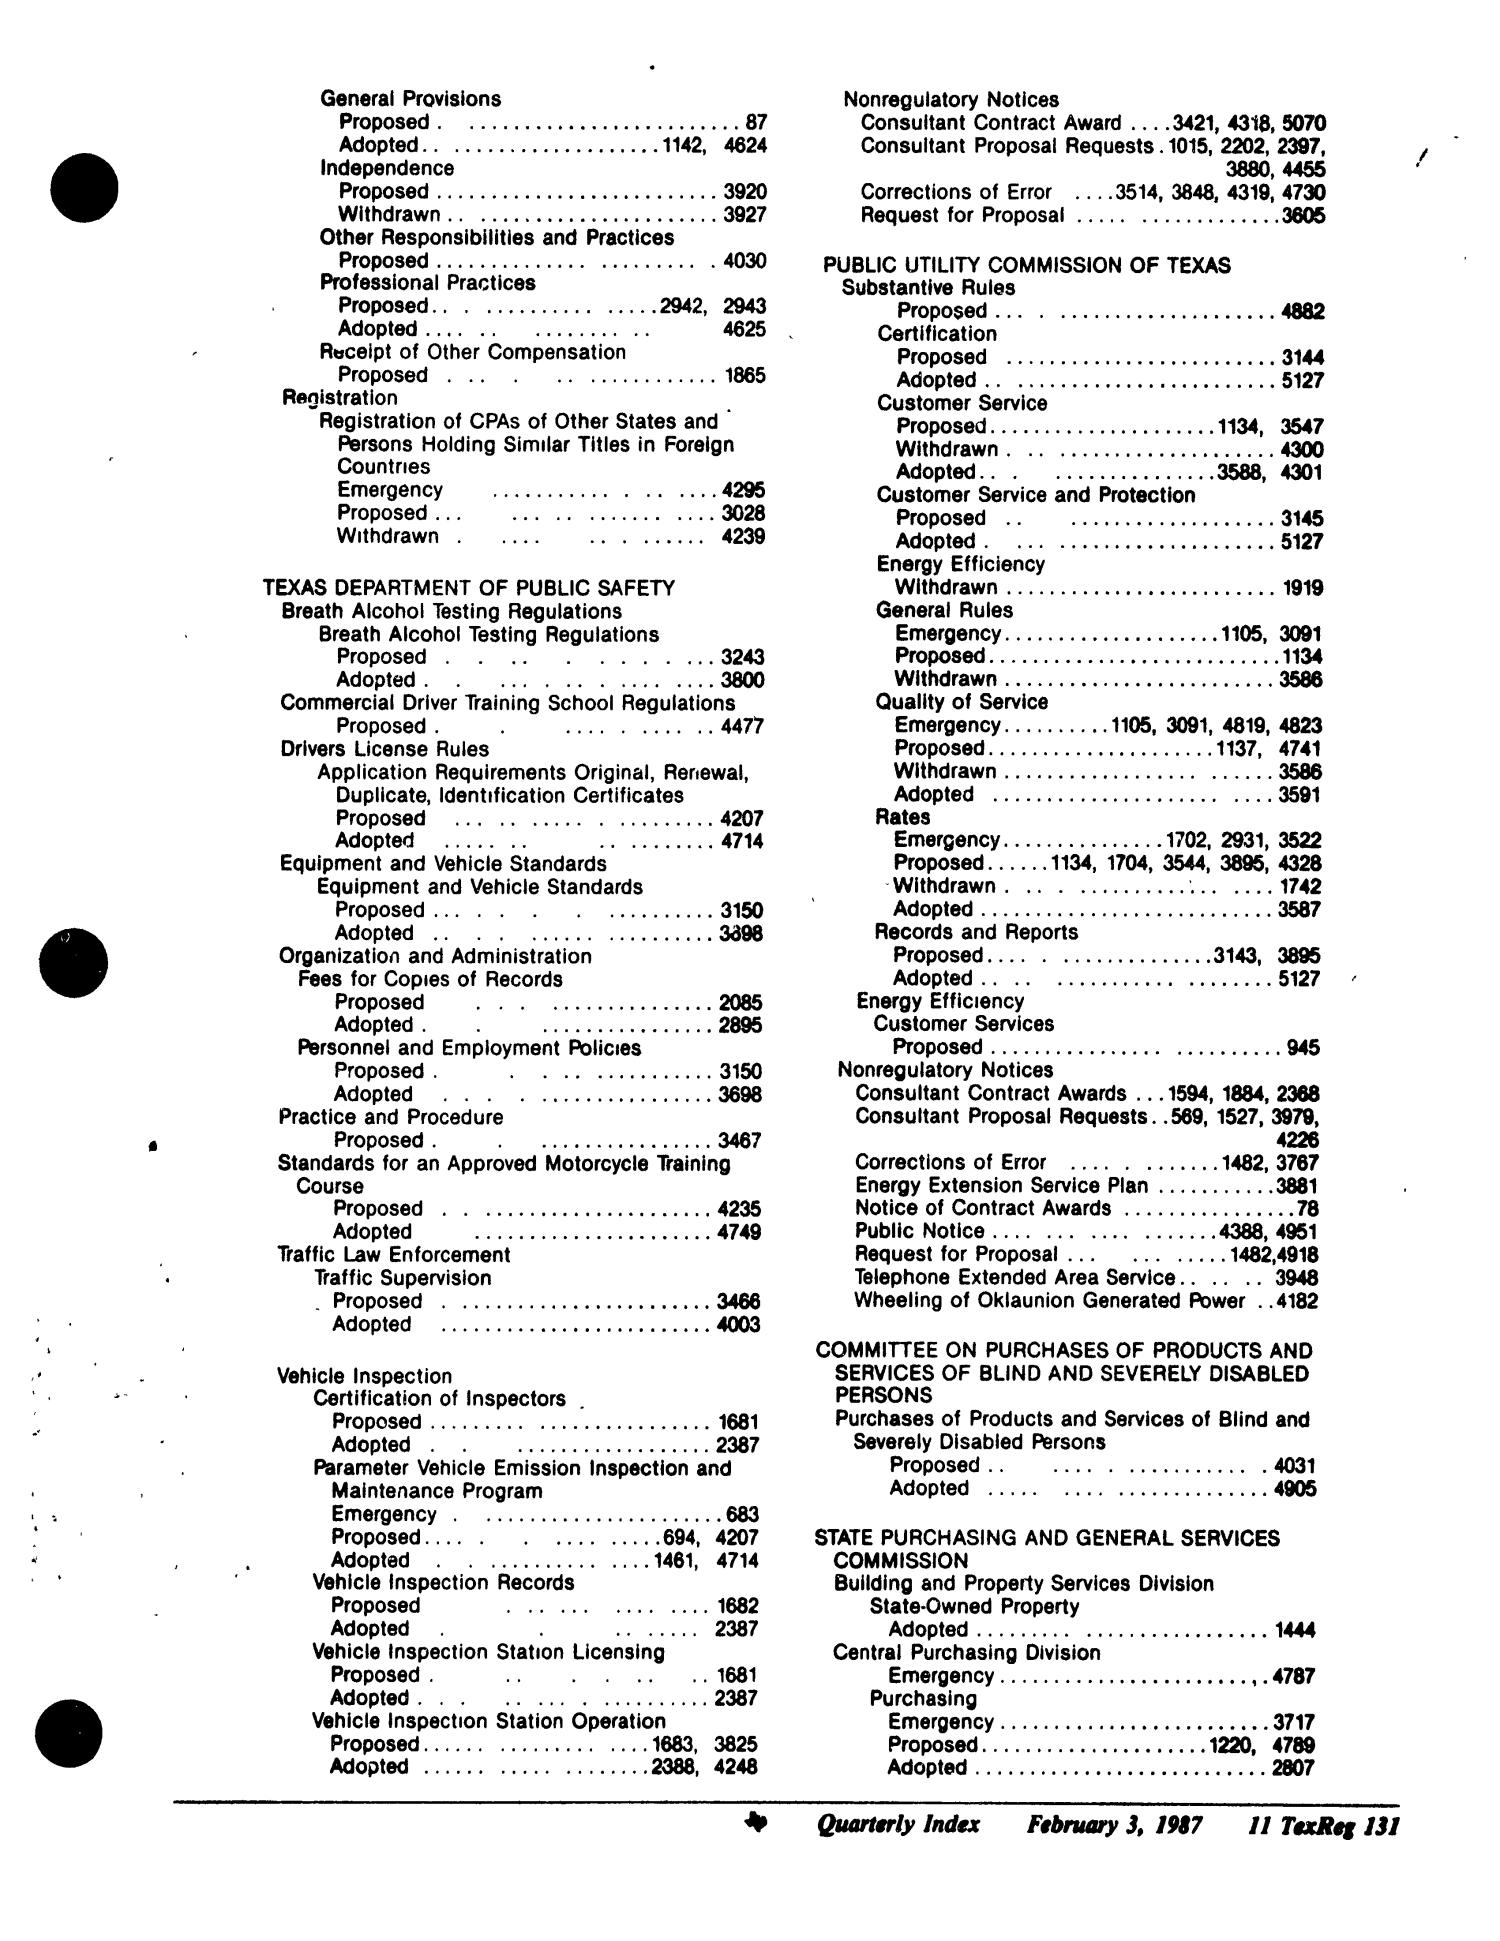 Texas Register: Annual Index January - December 1986, Volume 11 Numbers [1-96] - pages 104-157, February 3, 1987
                                                
                                                    131
                                                